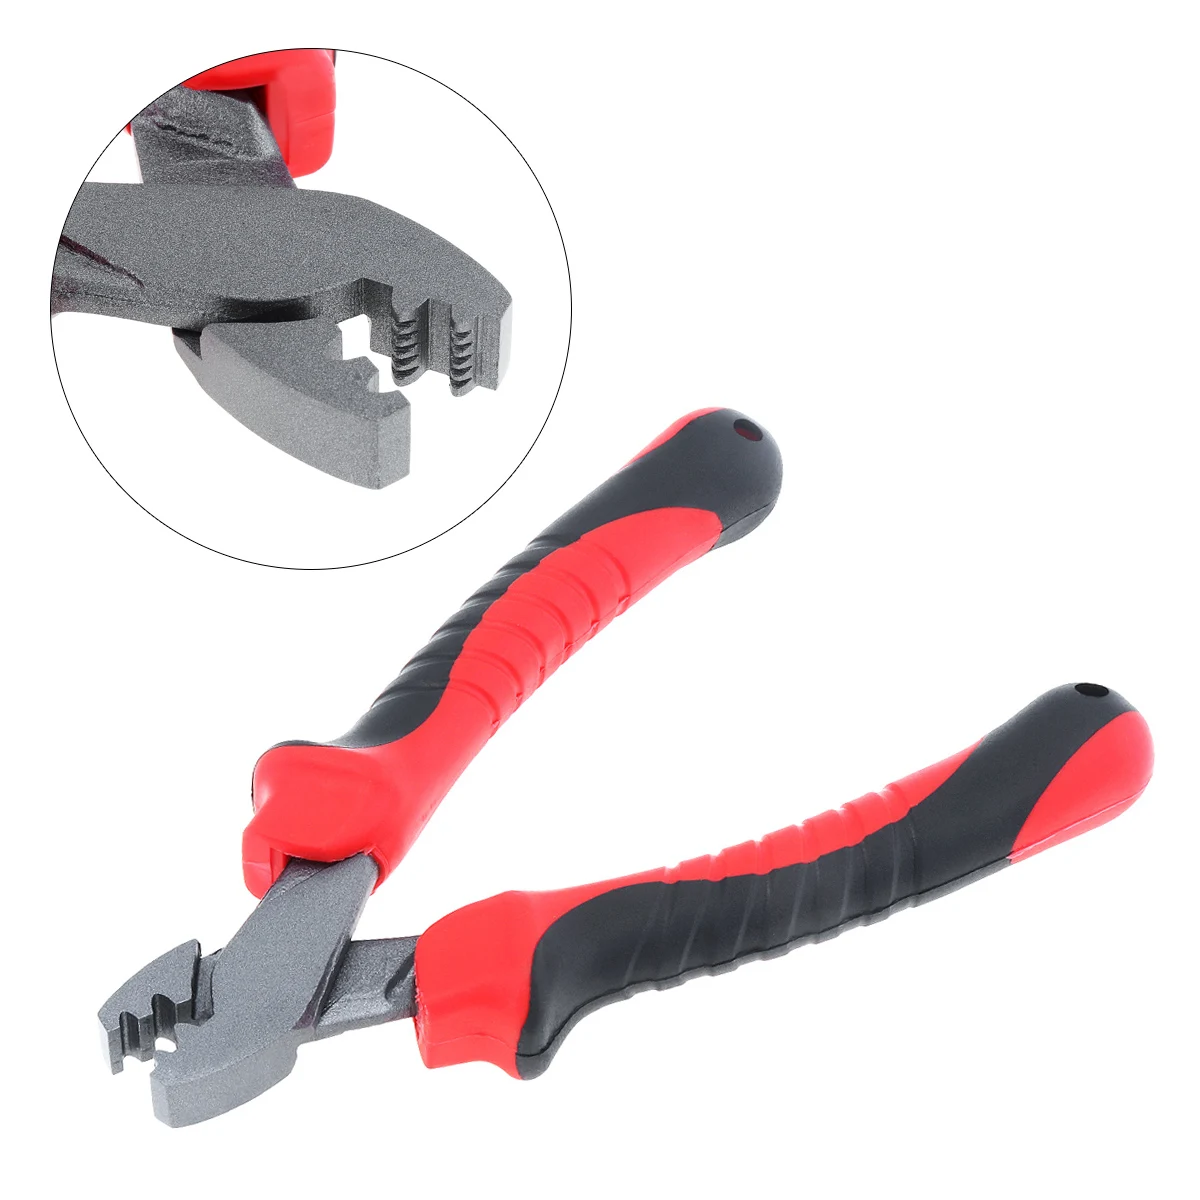 

Aviation Corrosion Resistant Aluminum Alloy Fishing Plier Hand Crimper Tool Saltwater Fishing Gear Accessories 15cm / 6inch